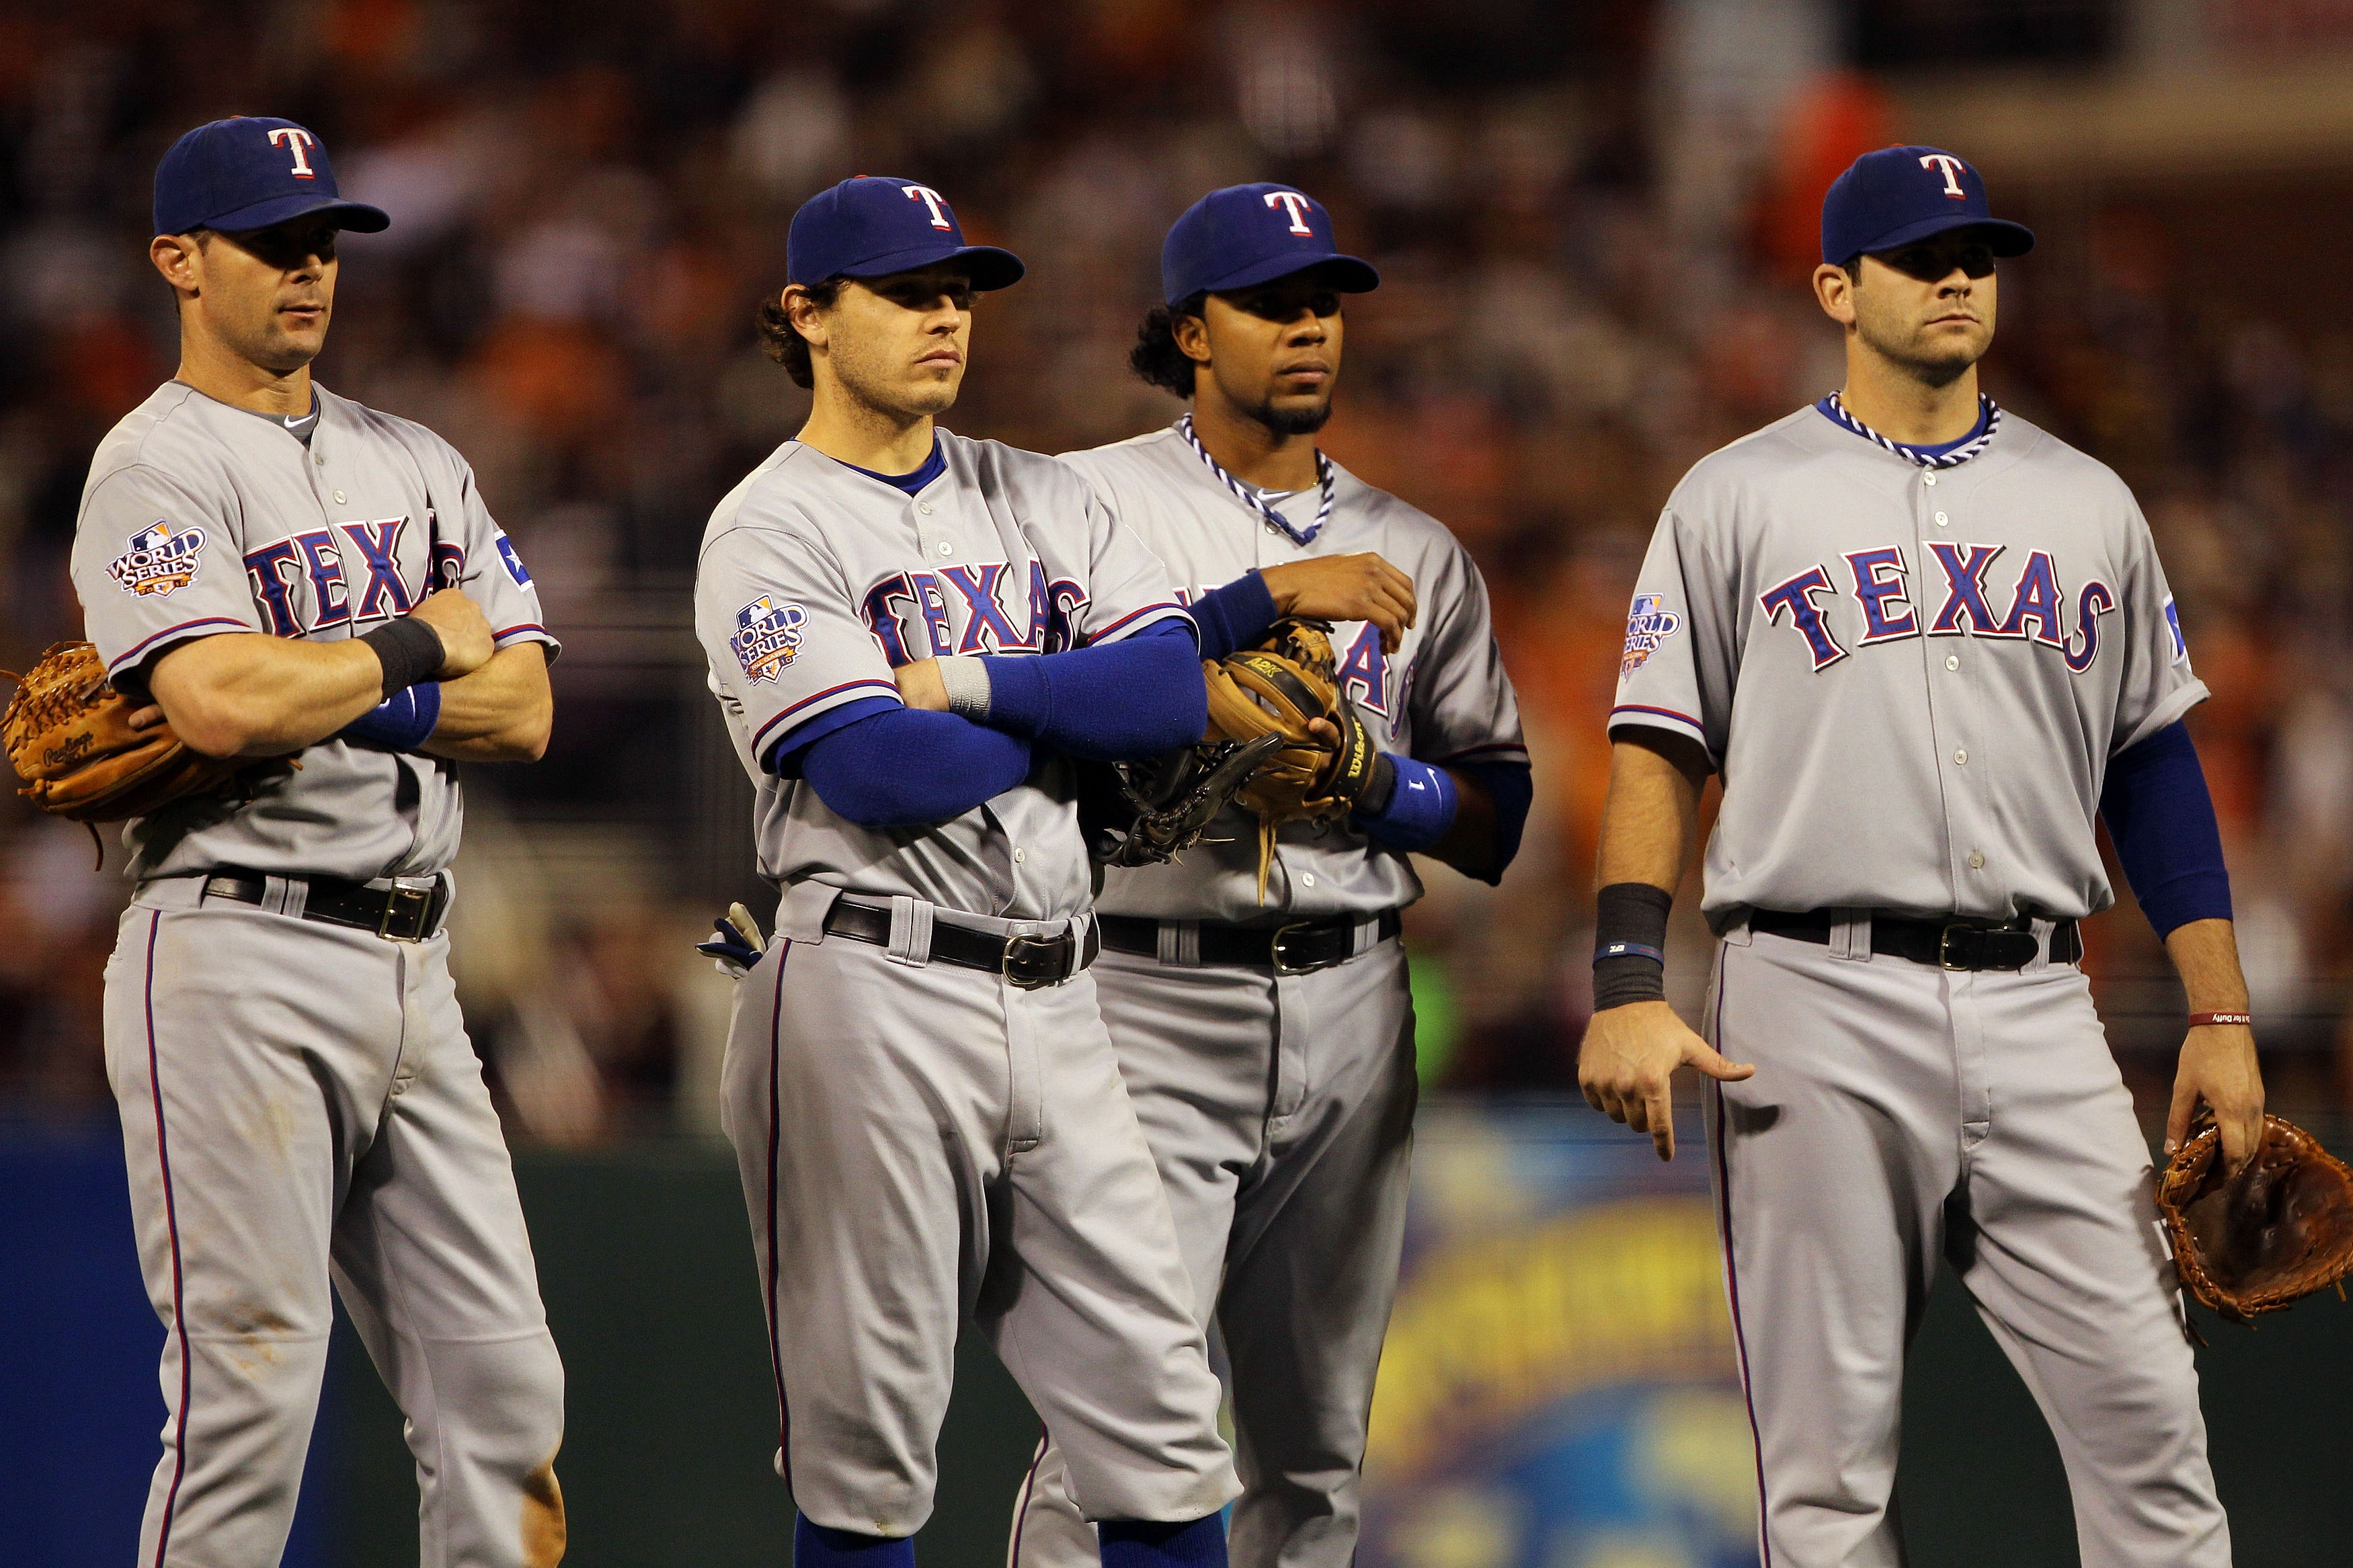 SAN FRANCISCO - OCTOBER 28:  (L-R) Michael Young #10, Ian Kinsler #5, Elvis Andrus #1 and Mitch Moreland #18 of the Texas Rangers stand together during a pitching change in the seventh inning while taking on the San Francisco Giants in Game Two of the 201